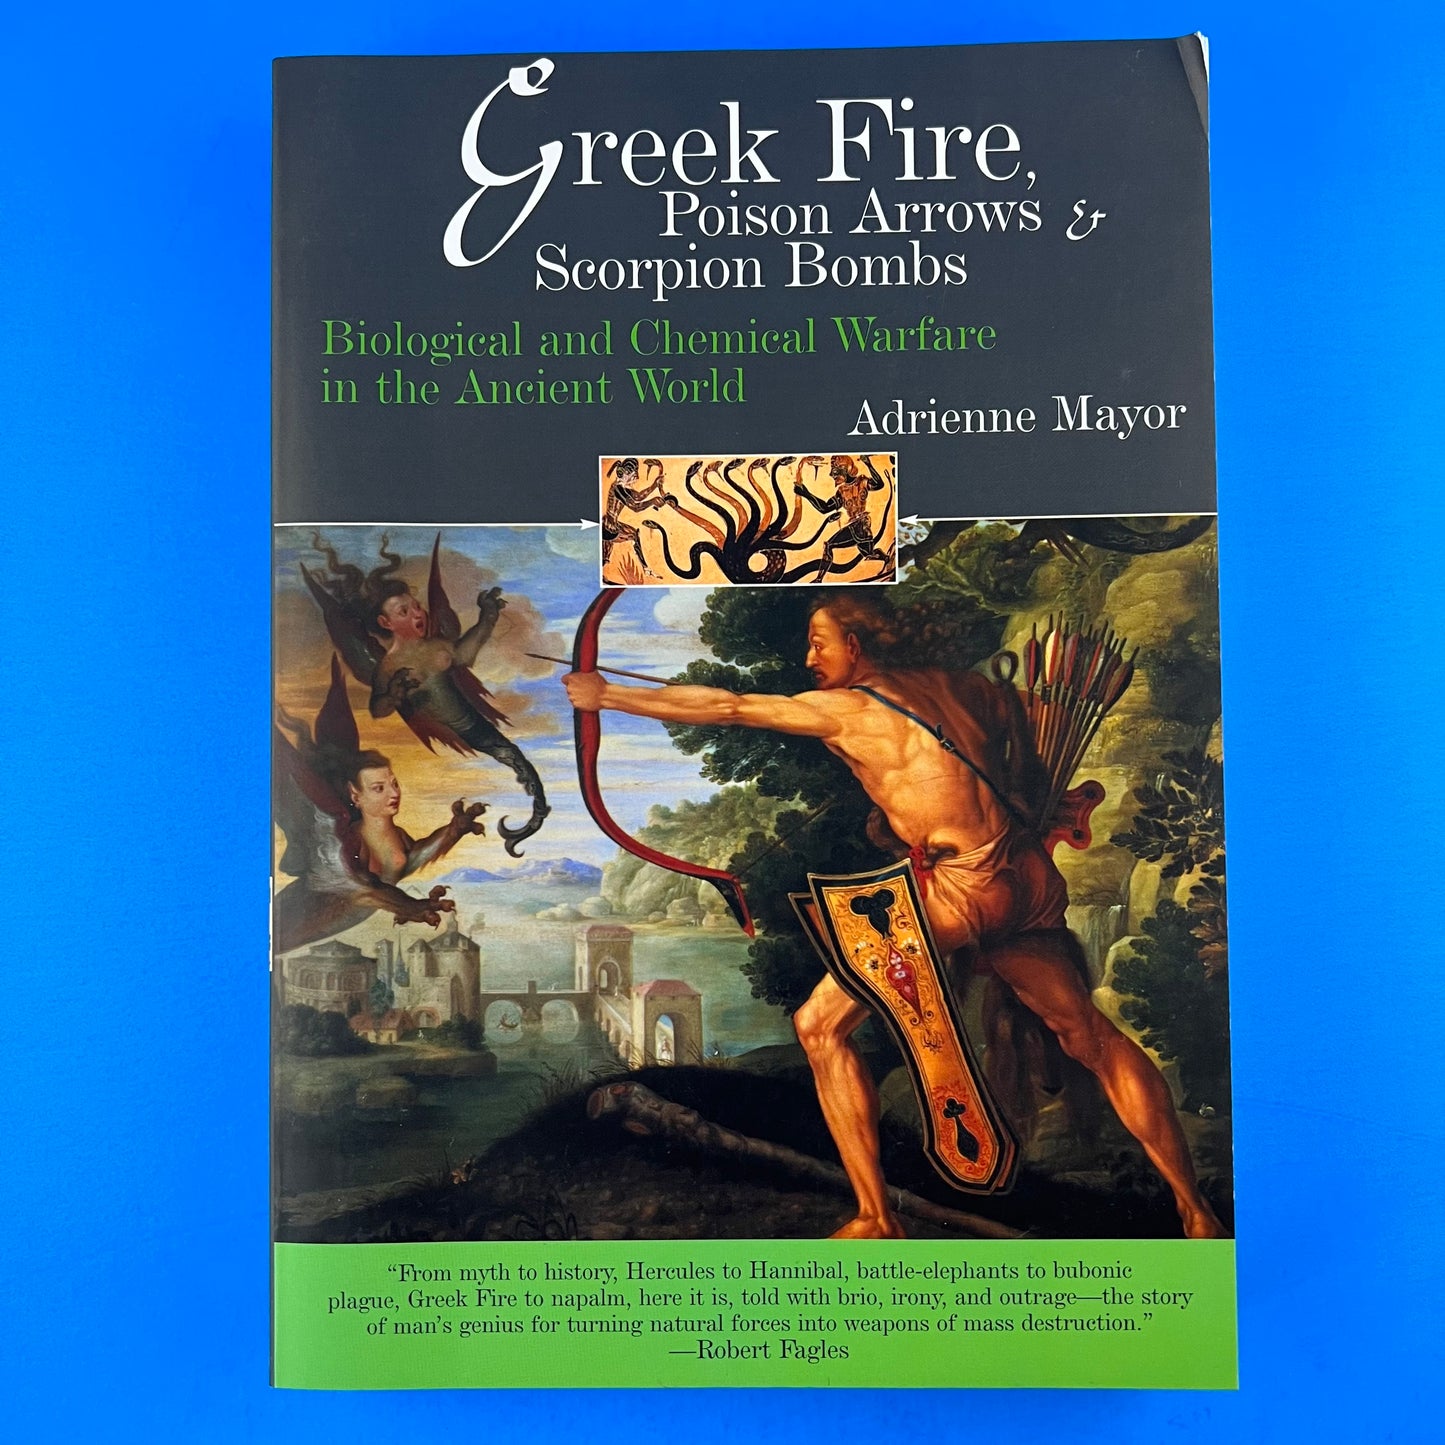 Greek Fire, Poison Arrows & Scorpion Bombs: Biological and Chemical Warfare in the Ancient World